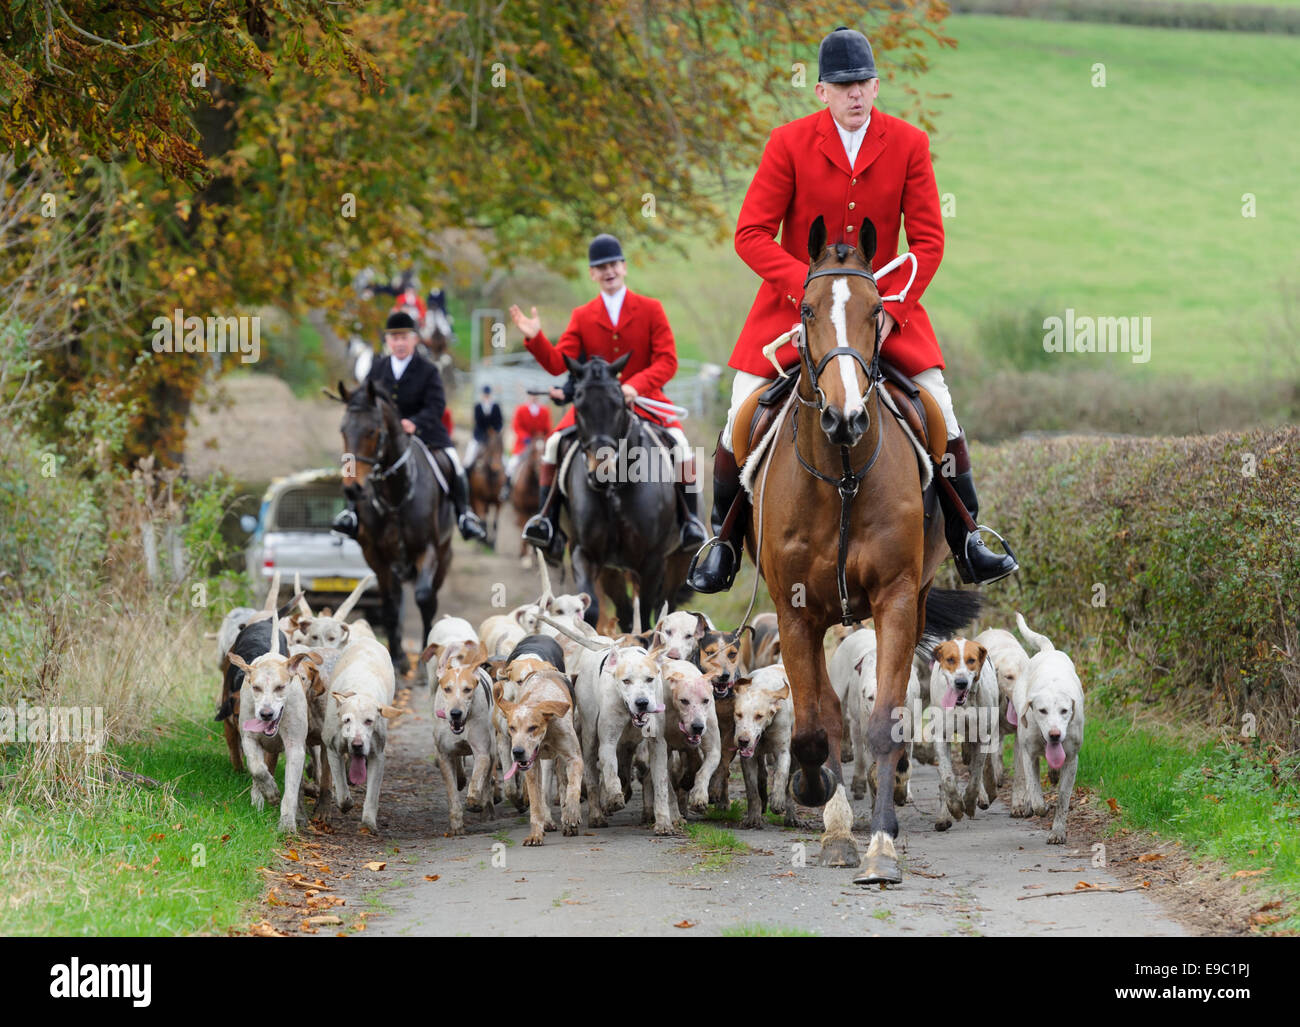 Leicestershire, UK. 24th October, 2014. Huntsman Peter Collins and the Quorn fox hounds -The start of the fox hunting season - Quorn Hunt Opening Meet at The Kennels. Credit:  Nico Morgan/Alamy Live News Stock Photo